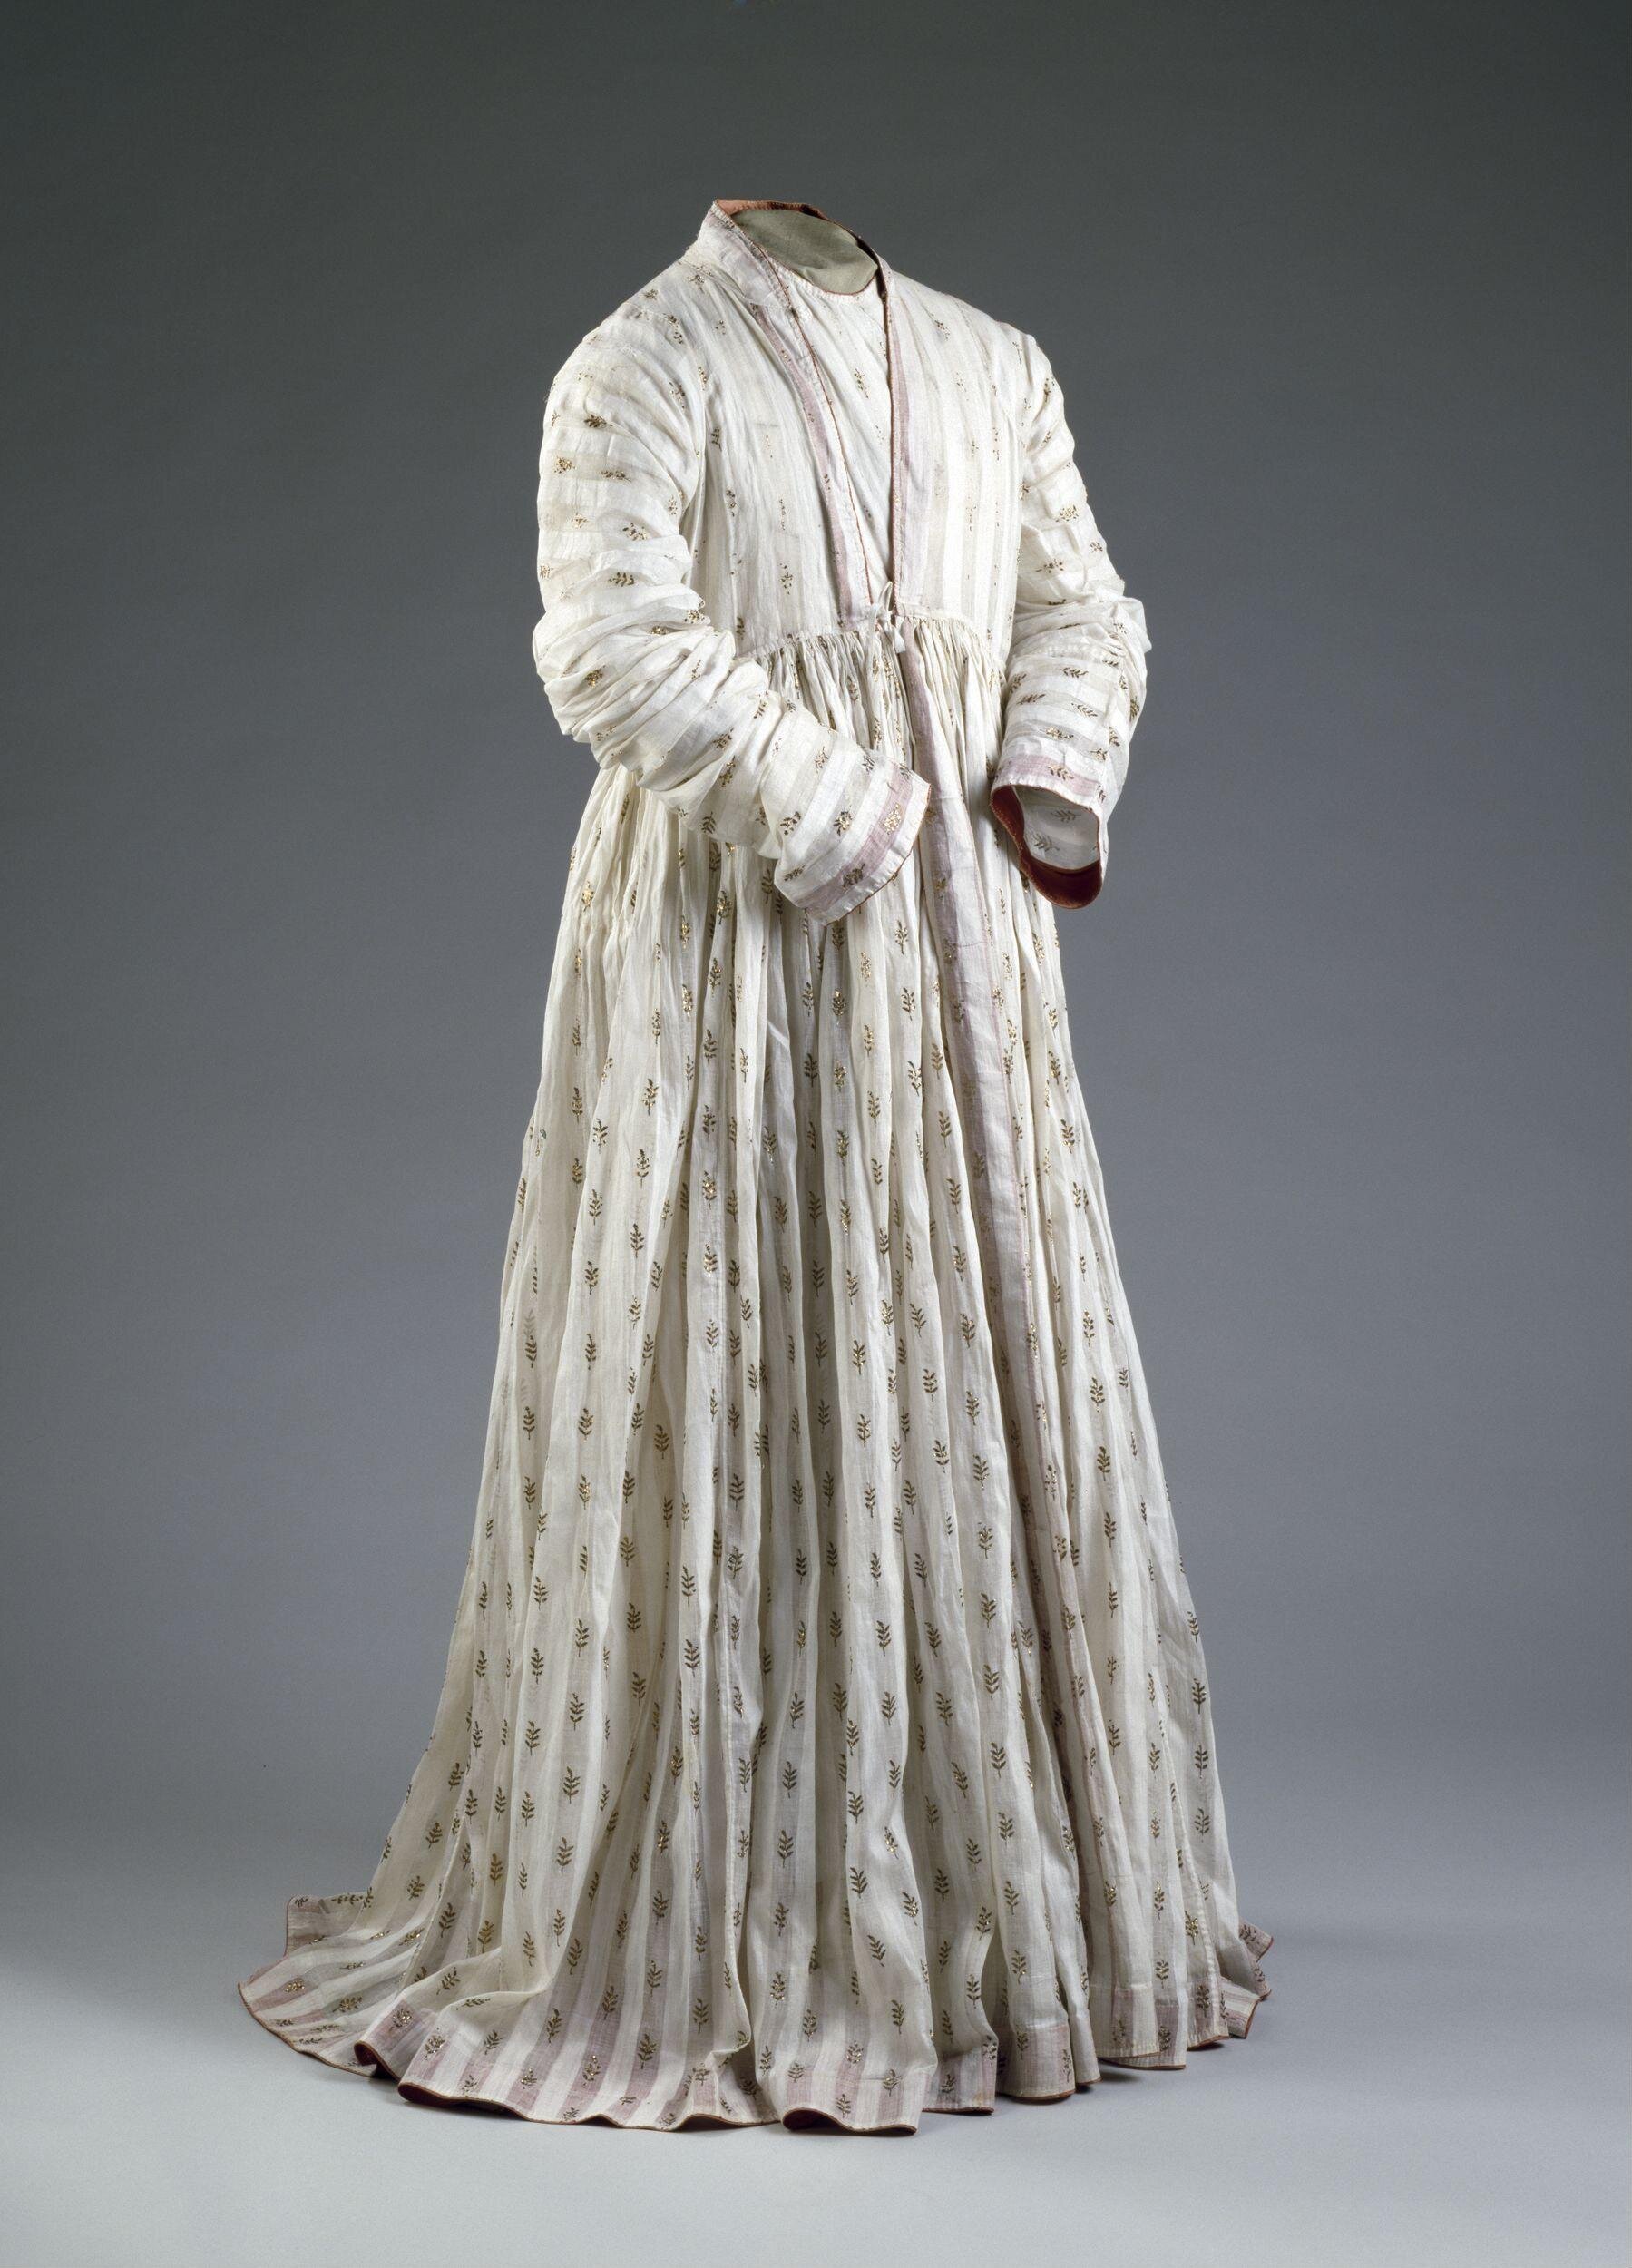 Man's robe (Jama) of white cotton muslin embroidered with gold. Woven in vertical stripes, alternately clear and opaque. The clear stripes are patterned at regular intervals with sprigs of gold foil, applied to the face of the material and stitched down on the reverse with white thread. The hem, collar, cuffs and other borders are faced on the inside with red satin.